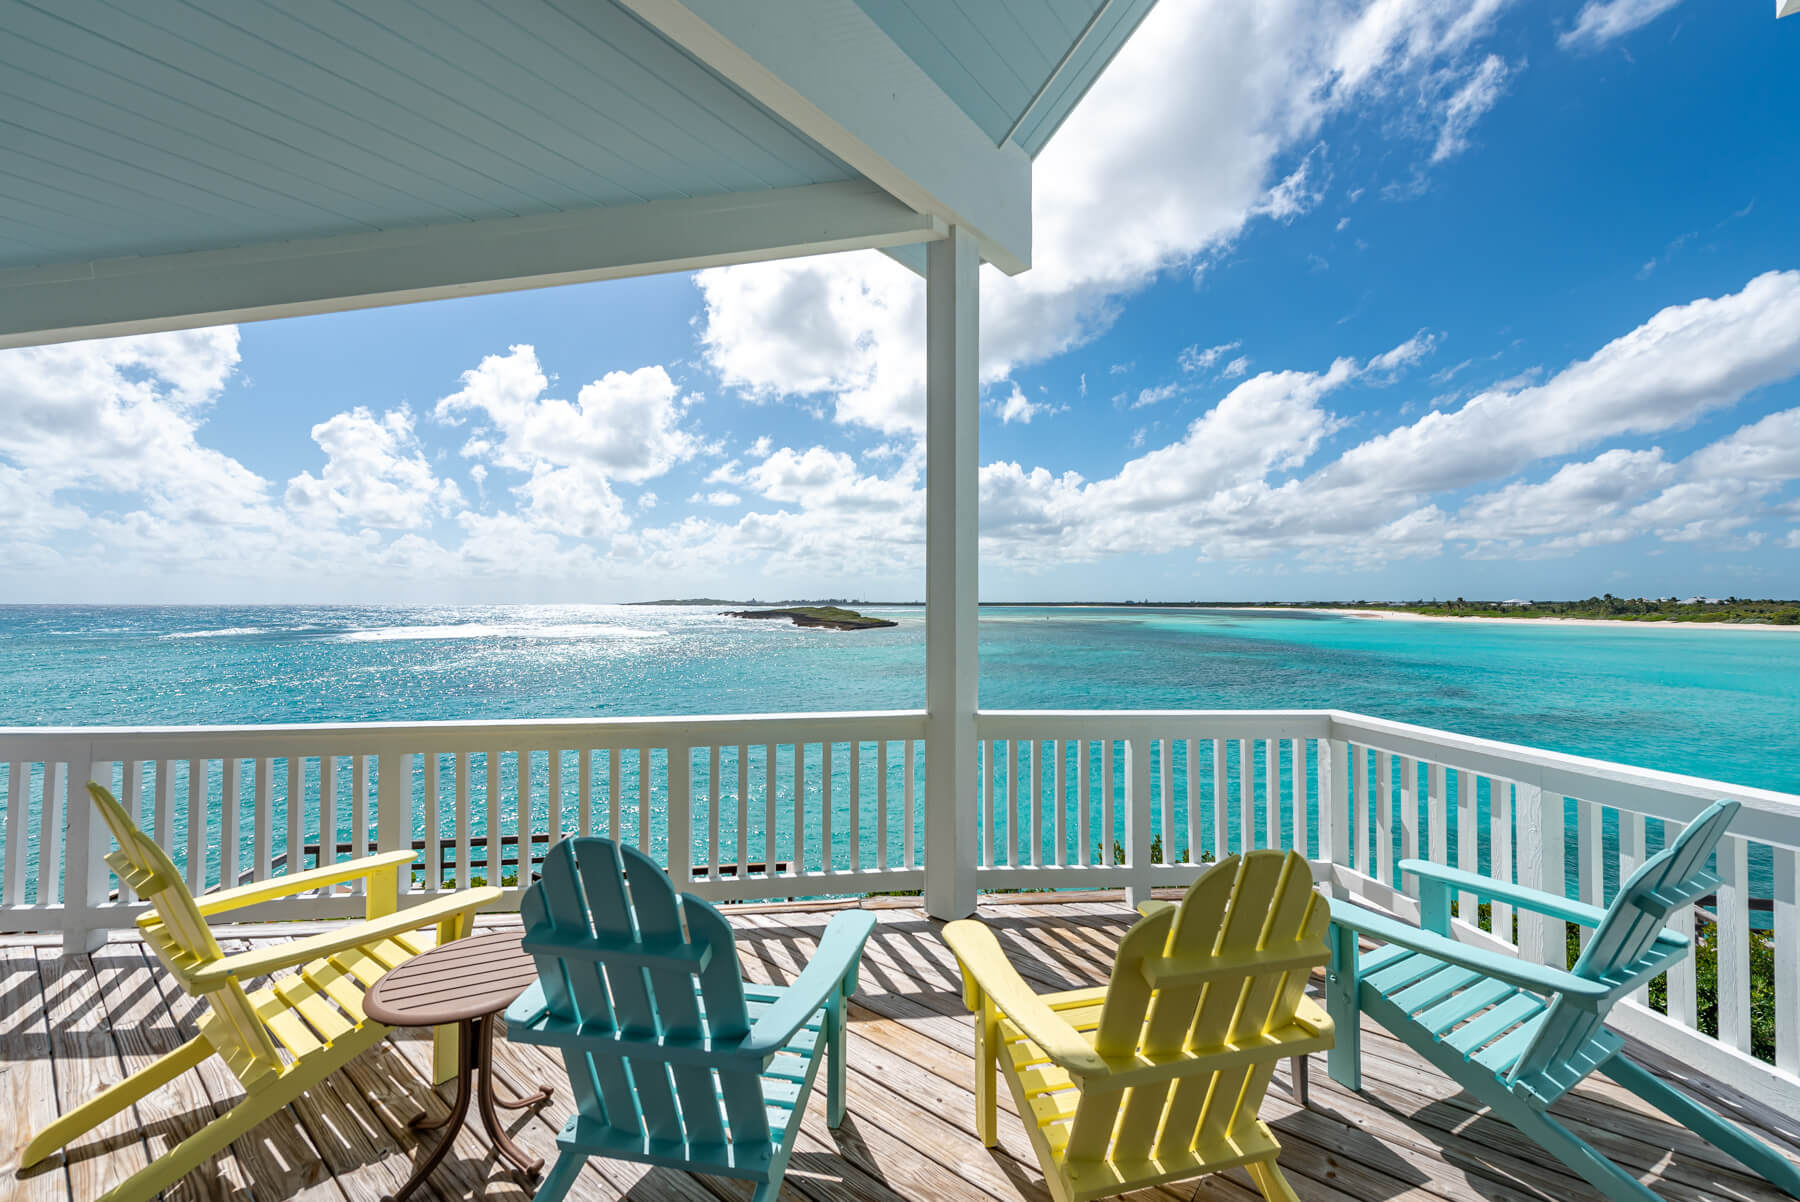 Balcony view from The Abaco Club